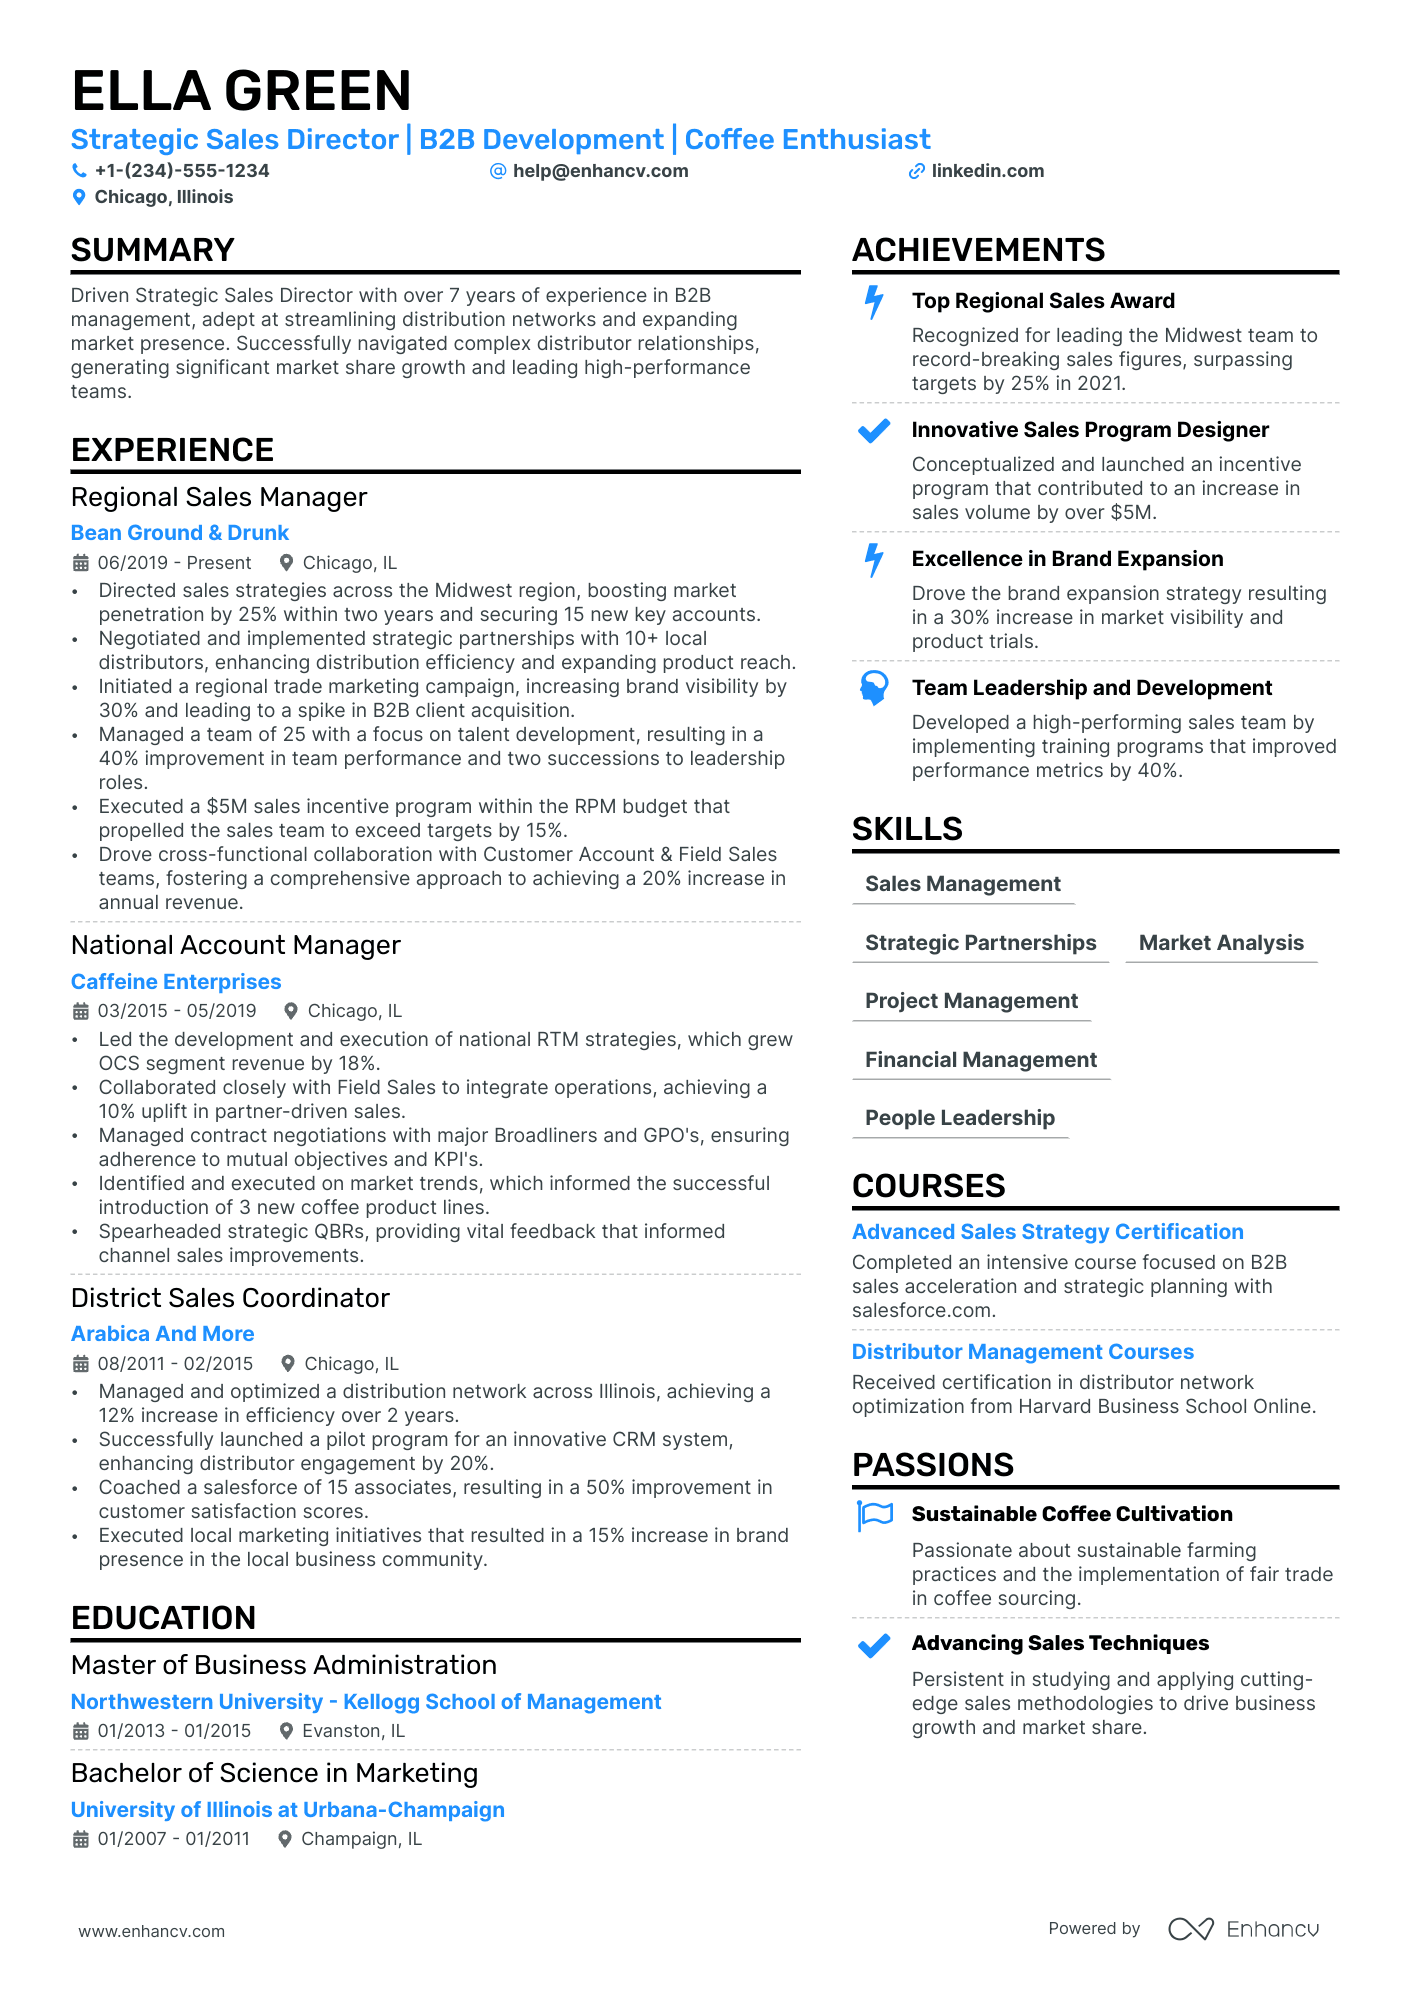 Distribution Manager resume example